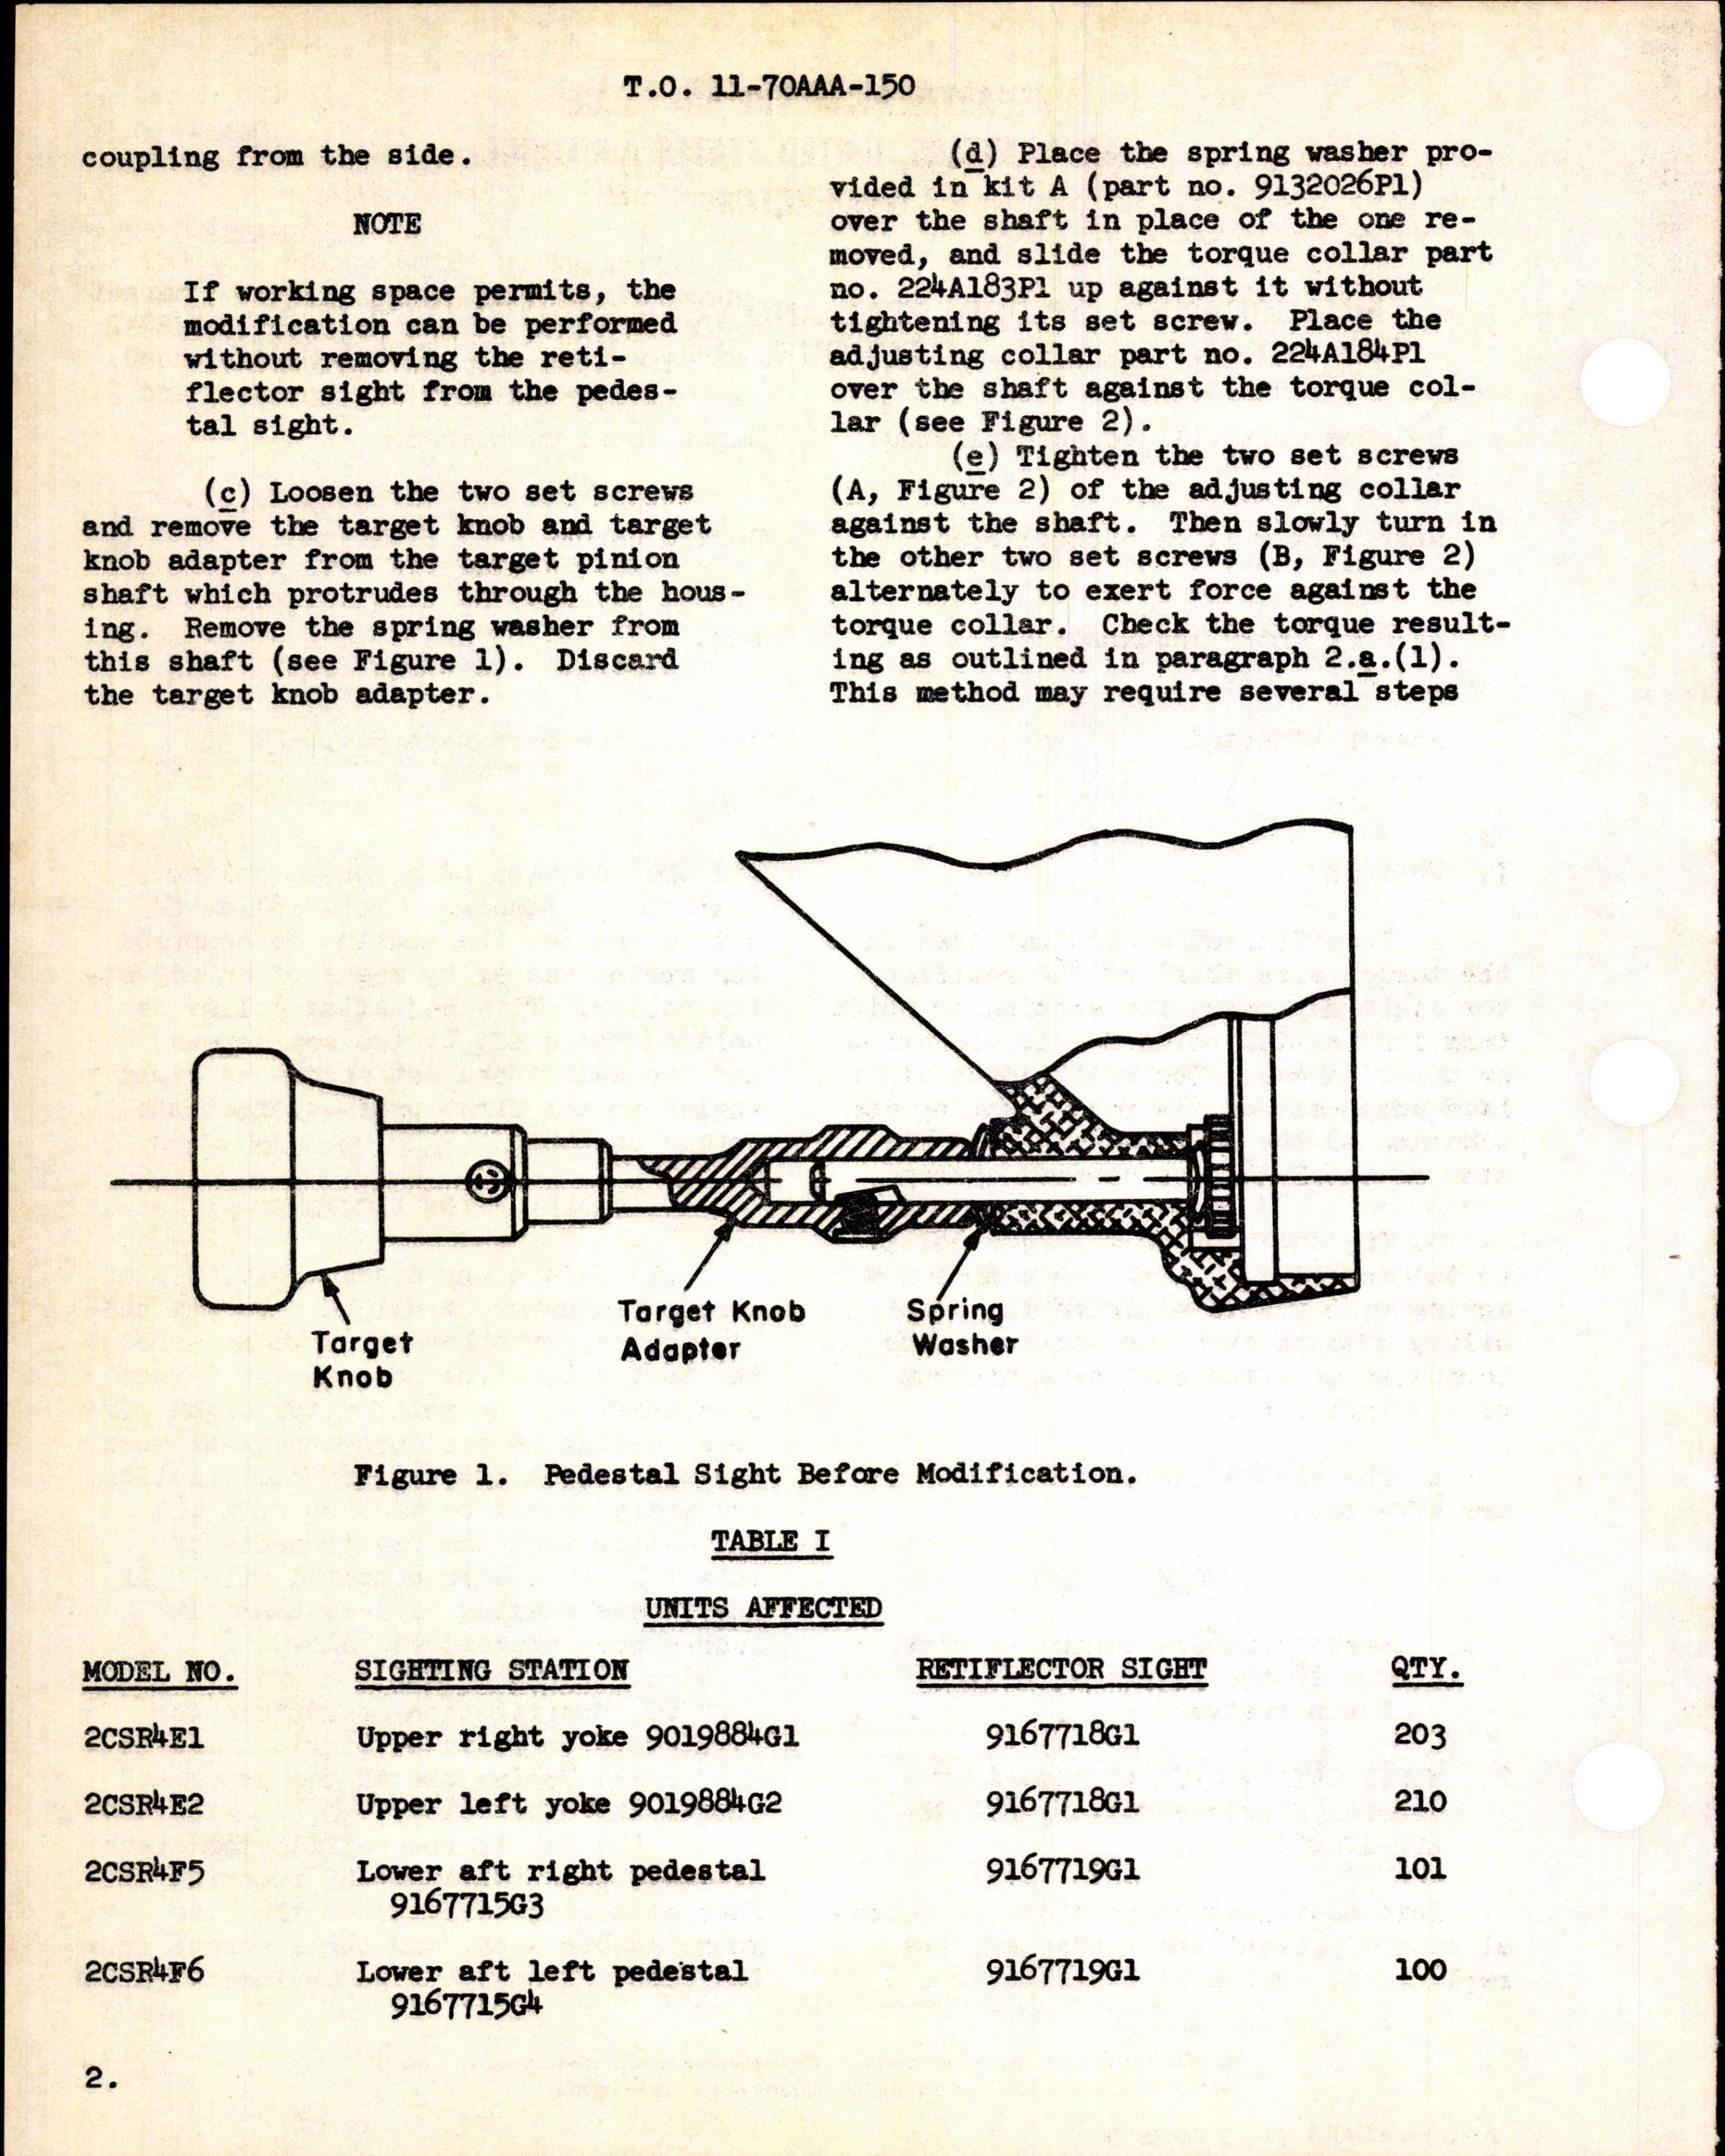 Sample page 2 from AirCorps Library document: Modification of Pedestal and Yoke Sights to Increase the Target Size Shaft Torque for B-36 Fire Control System